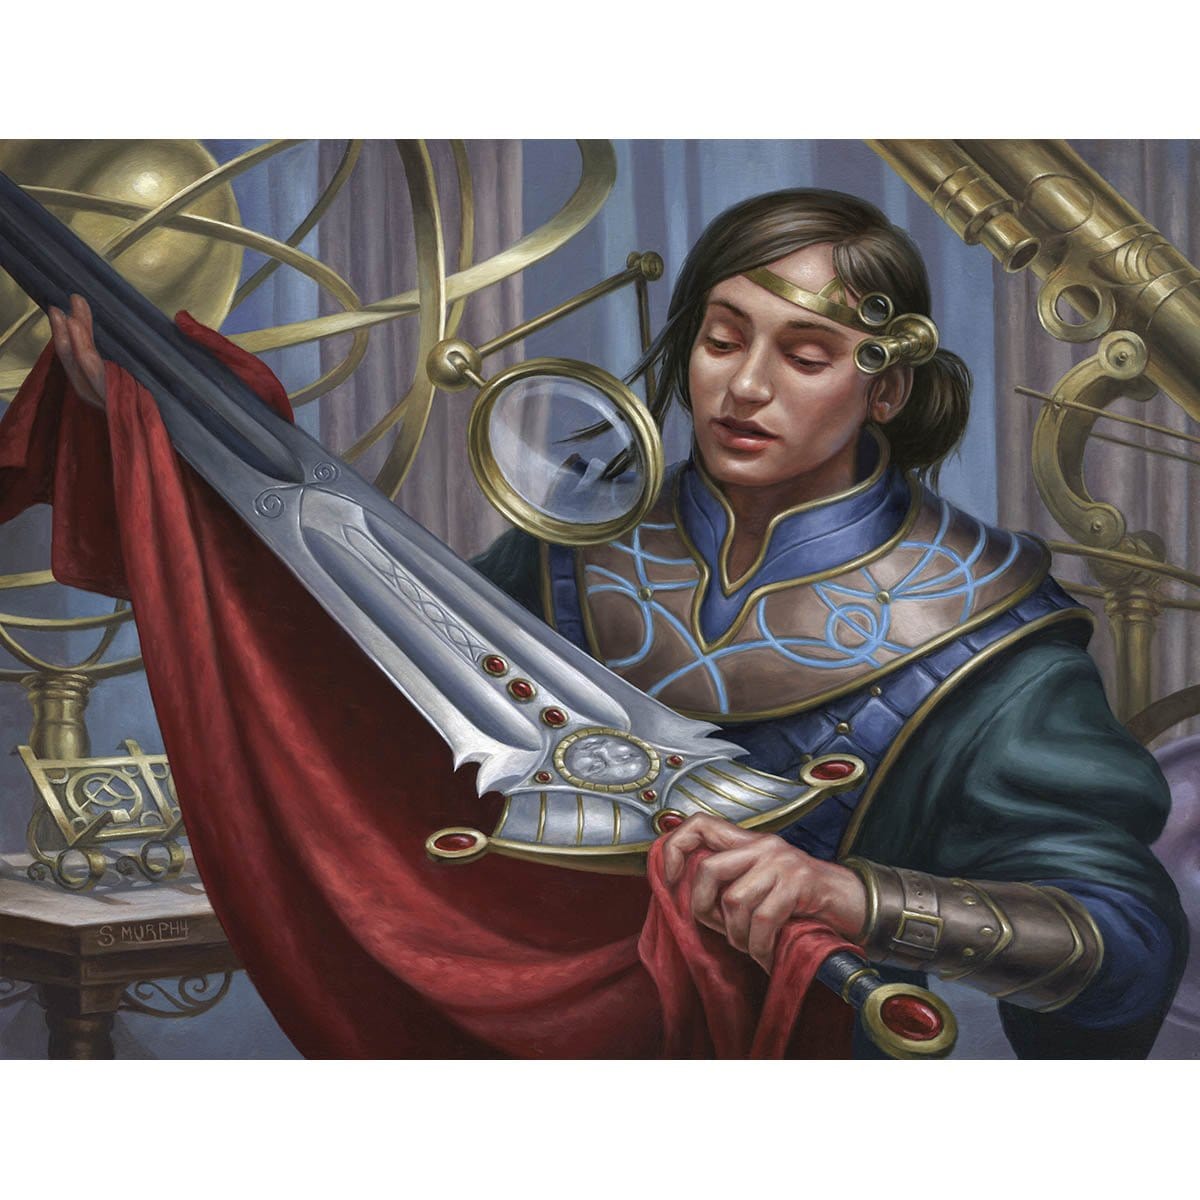 Tribute Mage Print - Print - Original Magic Art - Accessories for Magic the Gathering and other card games